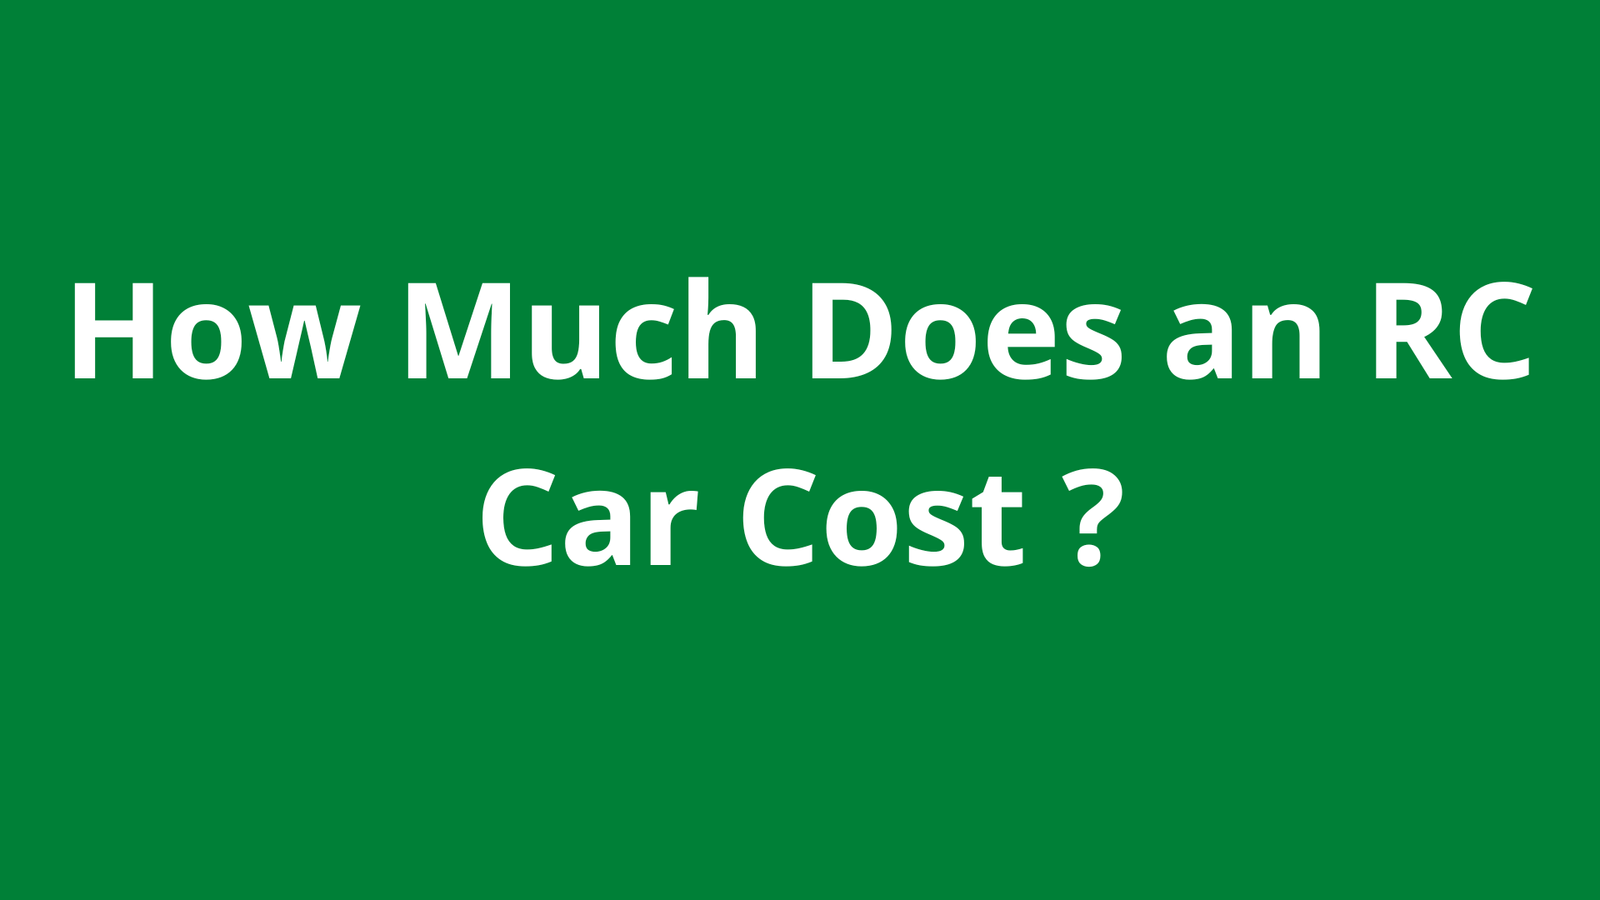 How Much Does an RC Car Cost